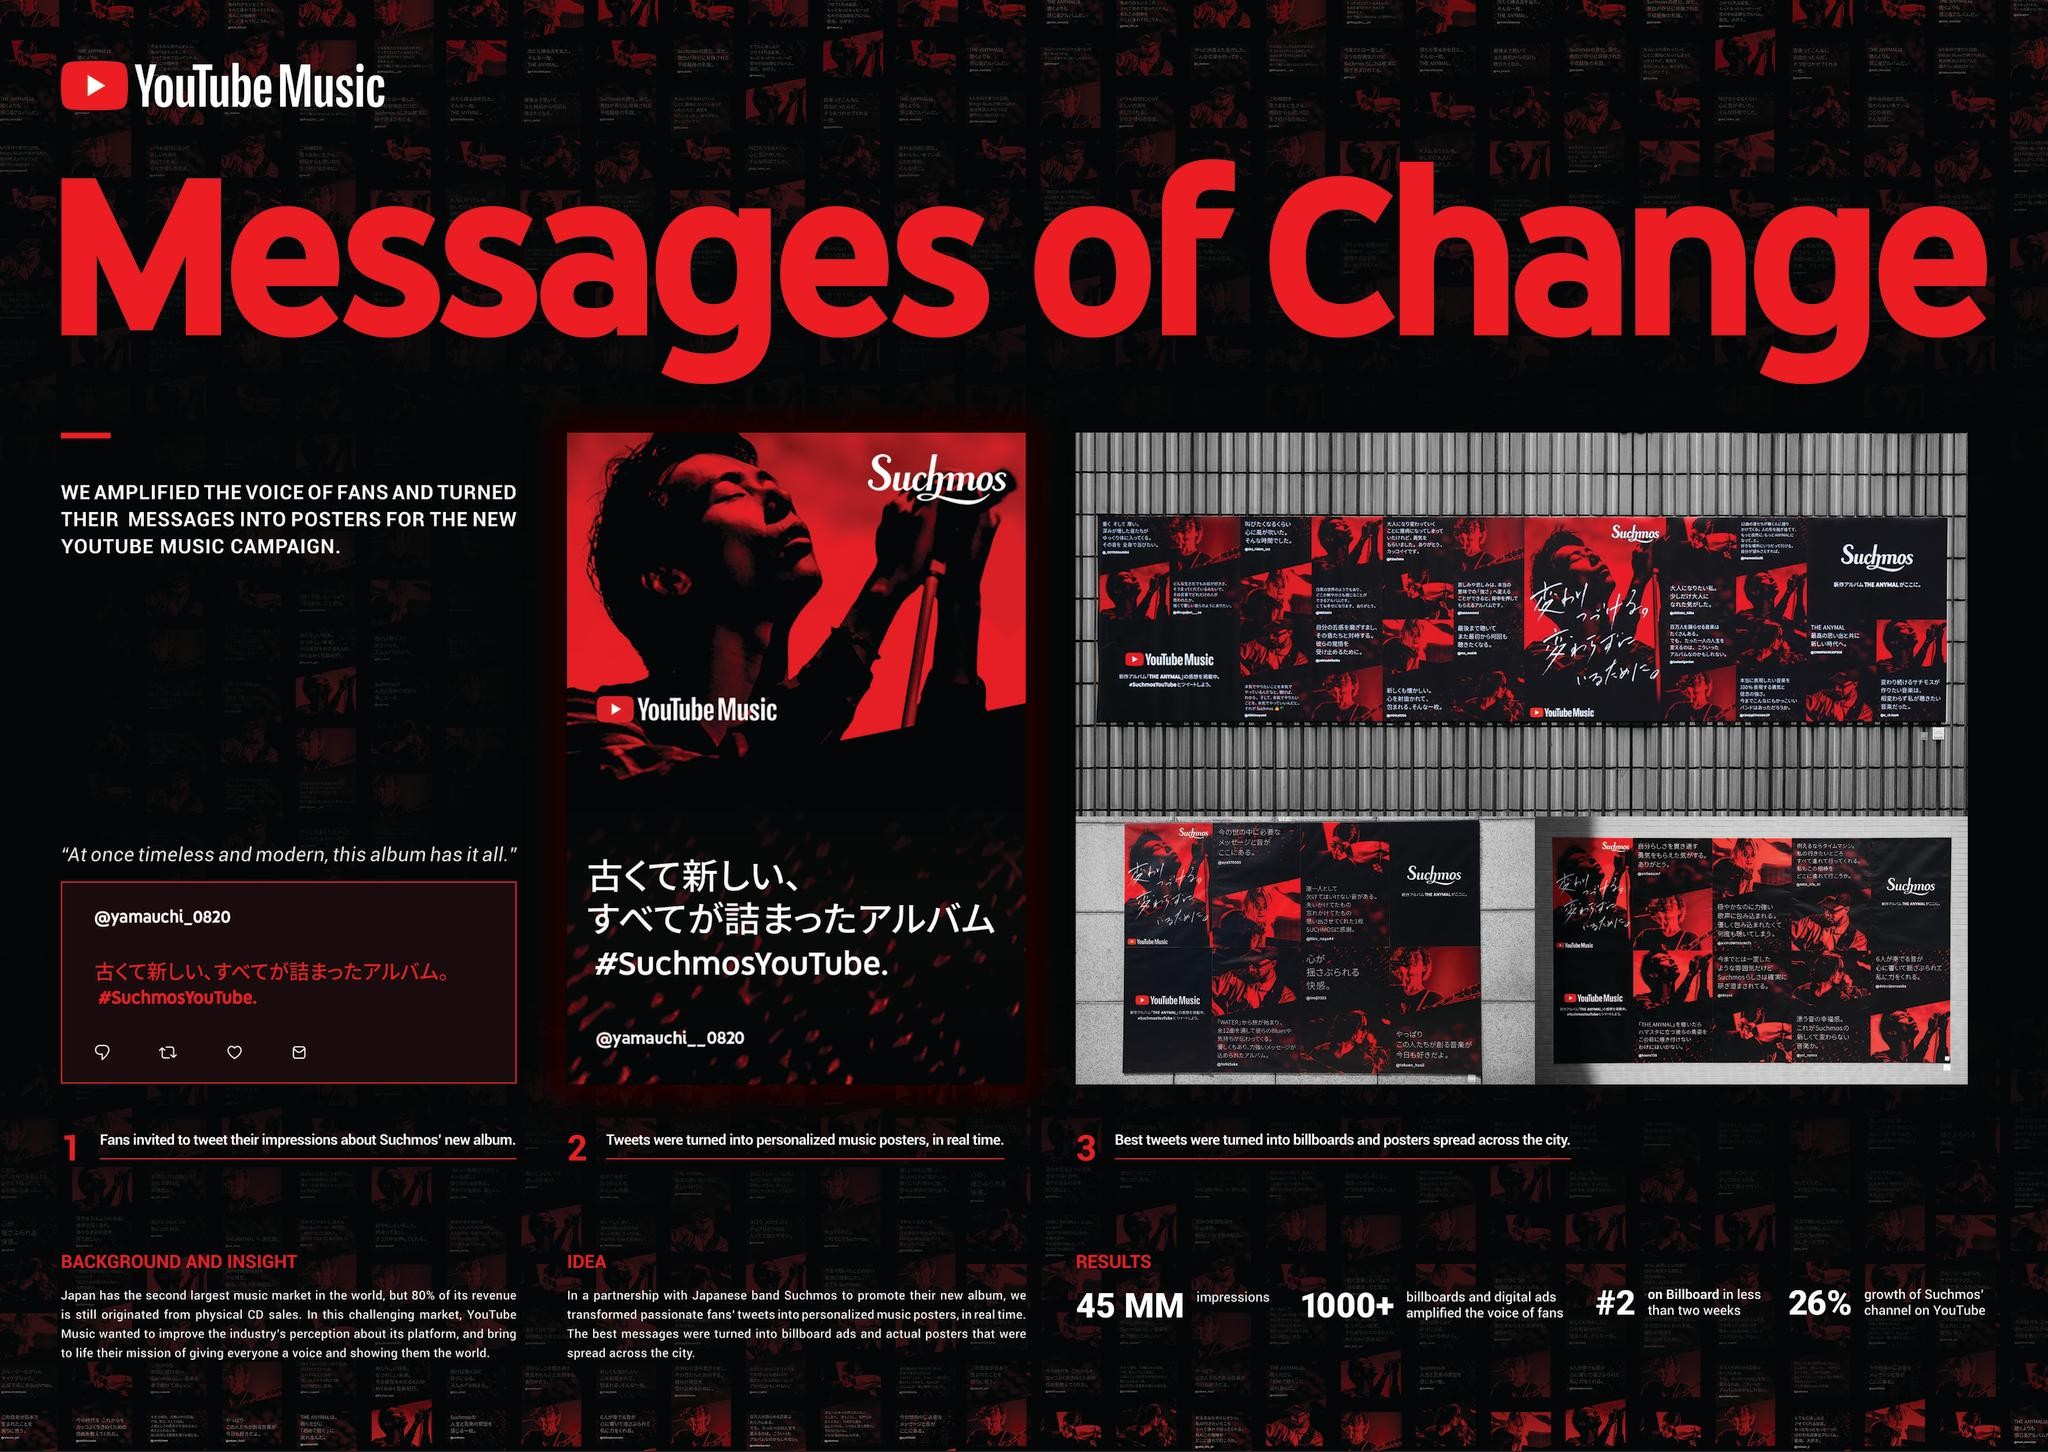 Messages of Change